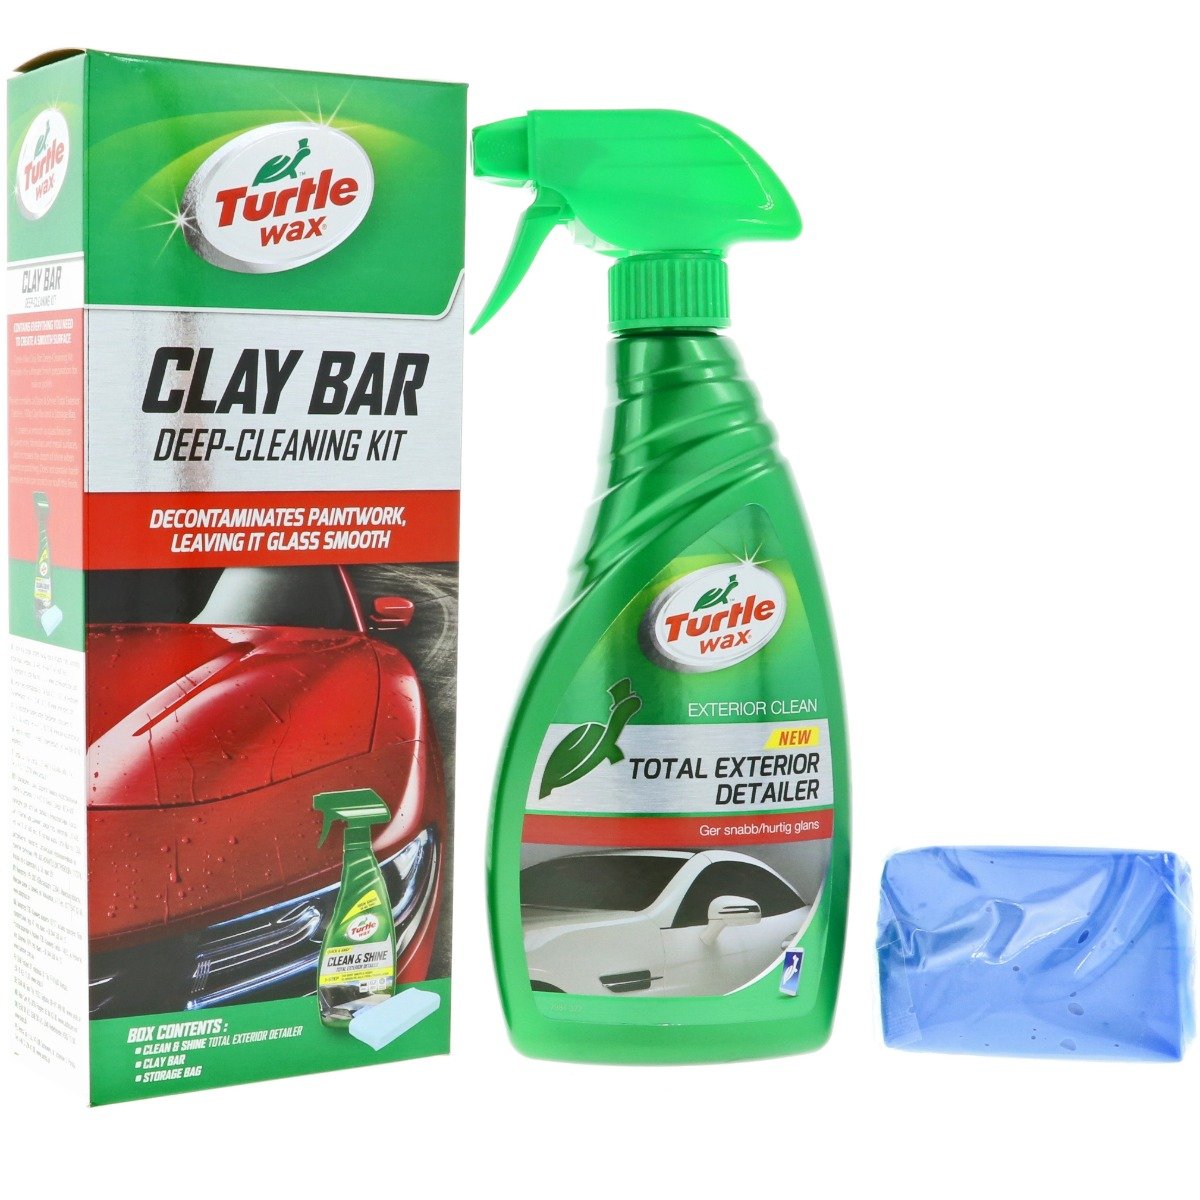 Clay Bar Deep-Cleaning Kit